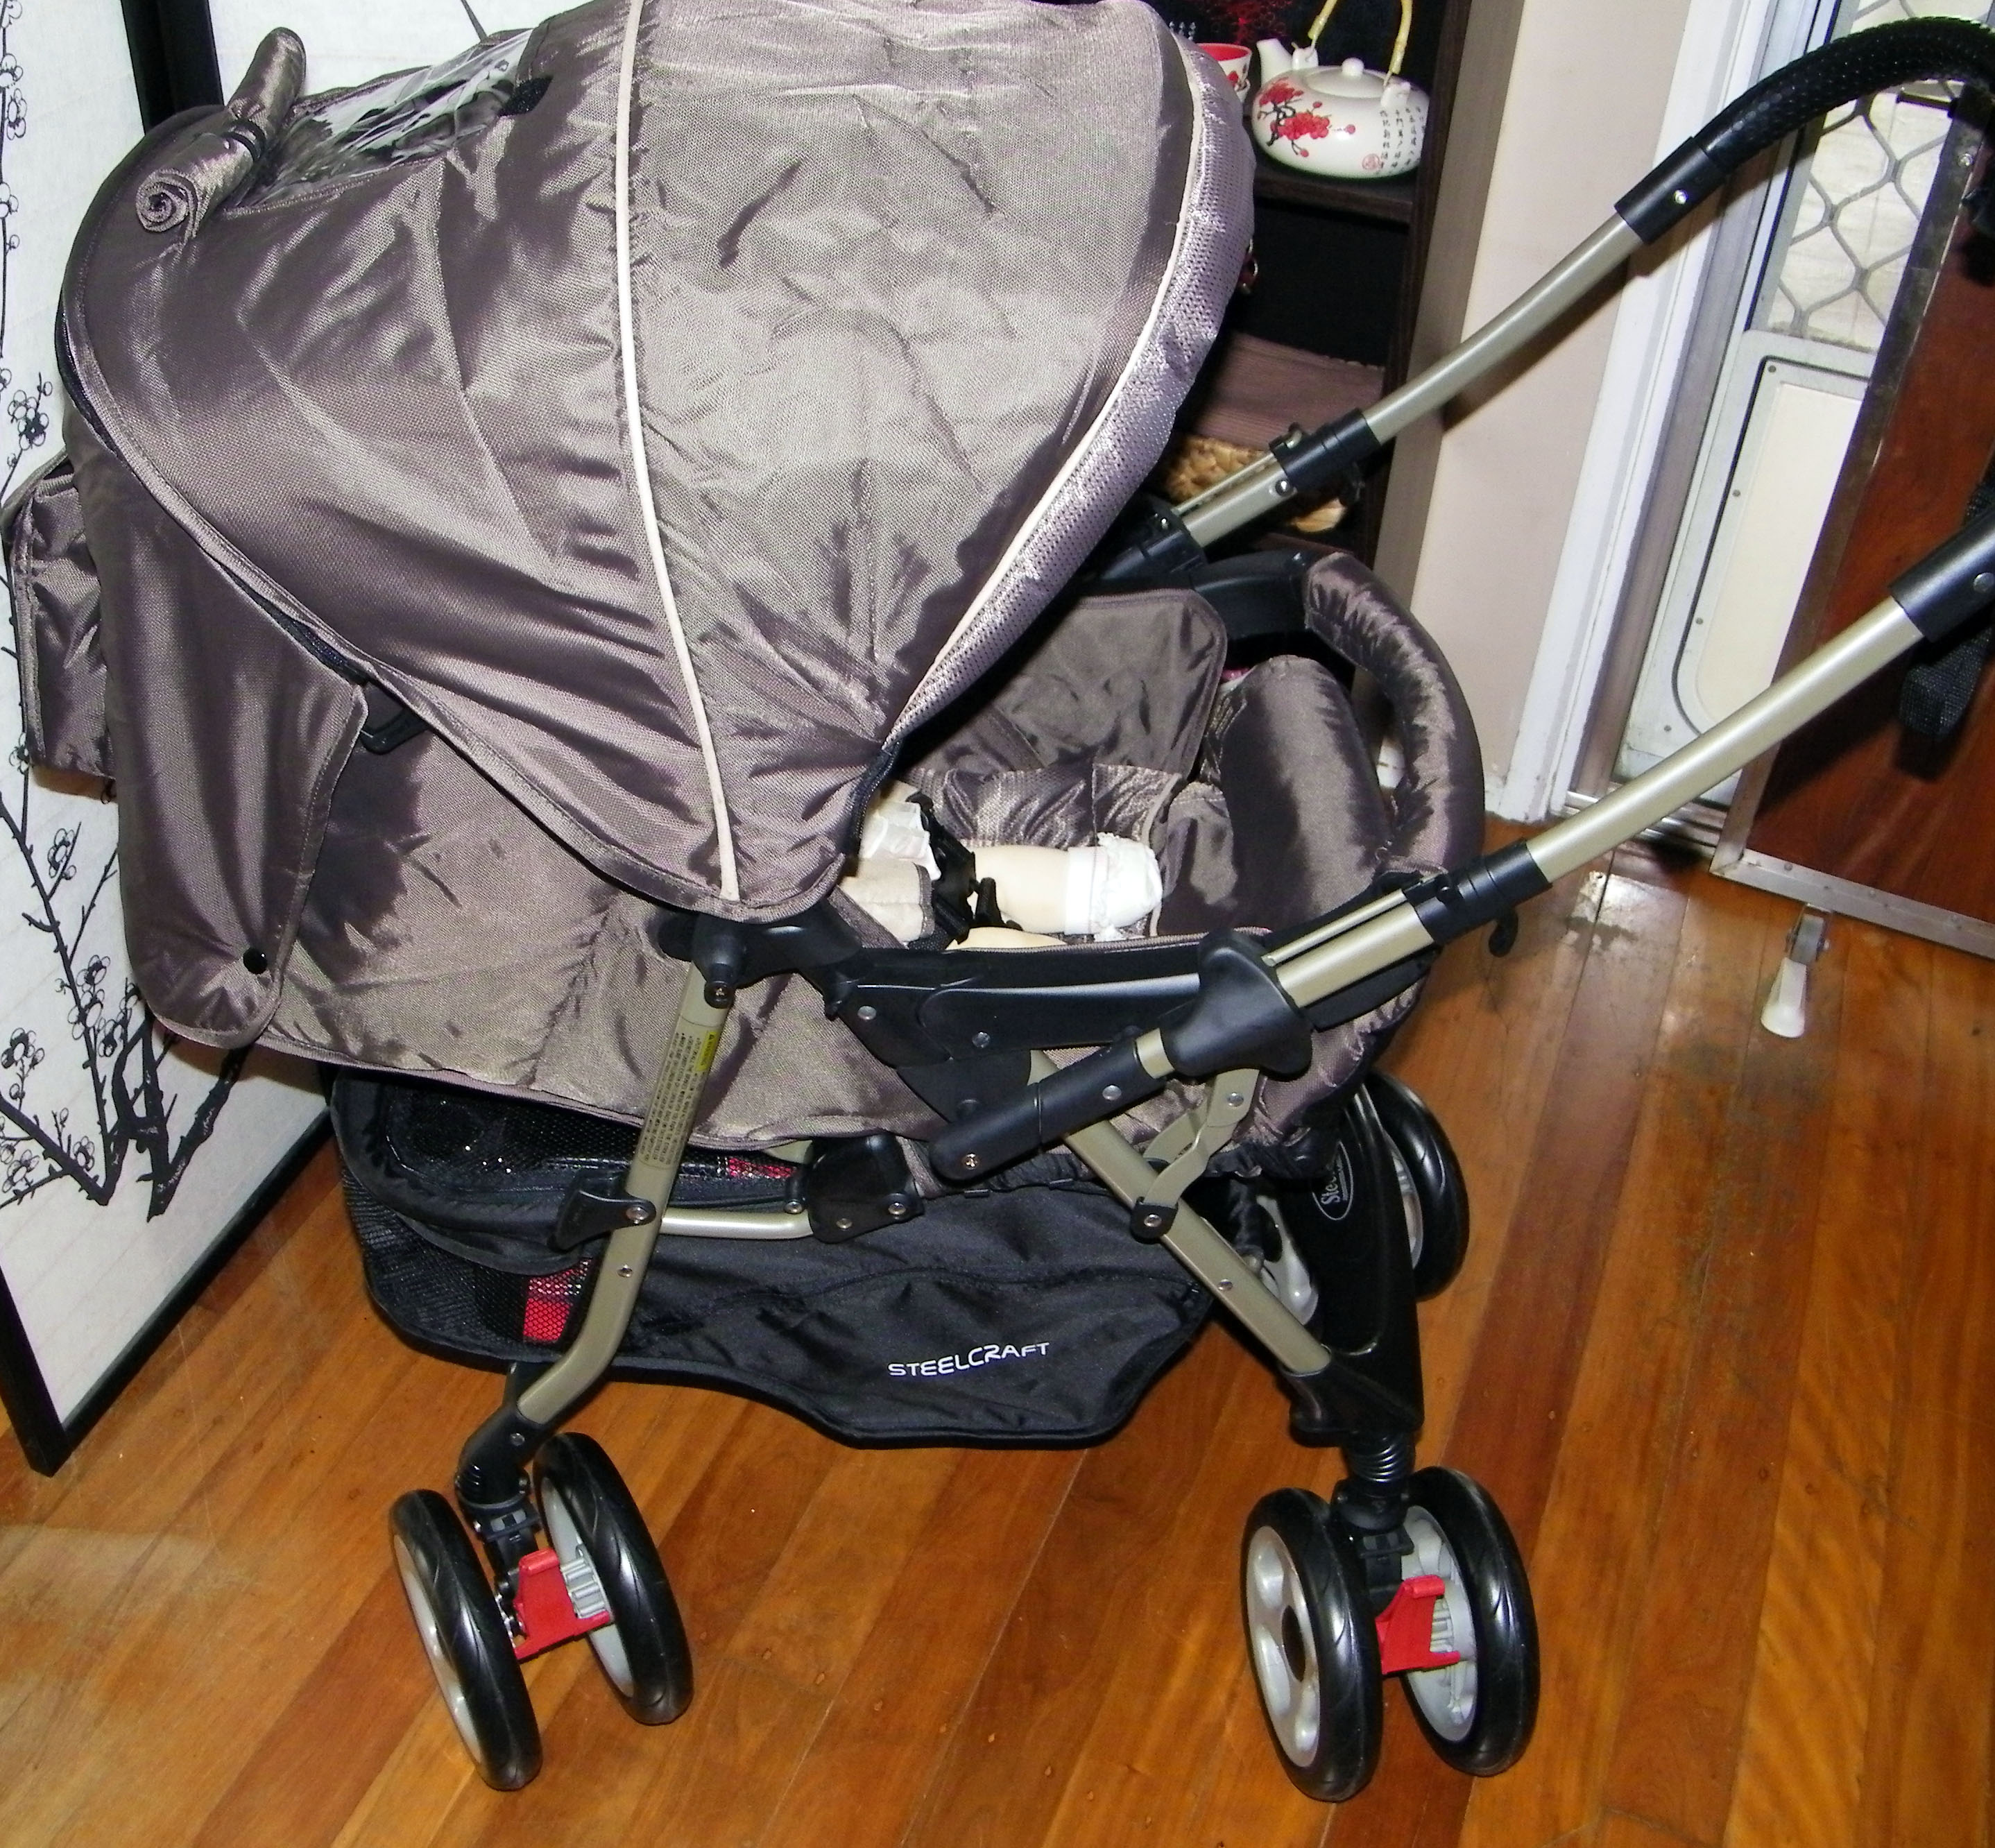 steelcraft acclaim reverse handle stroller review